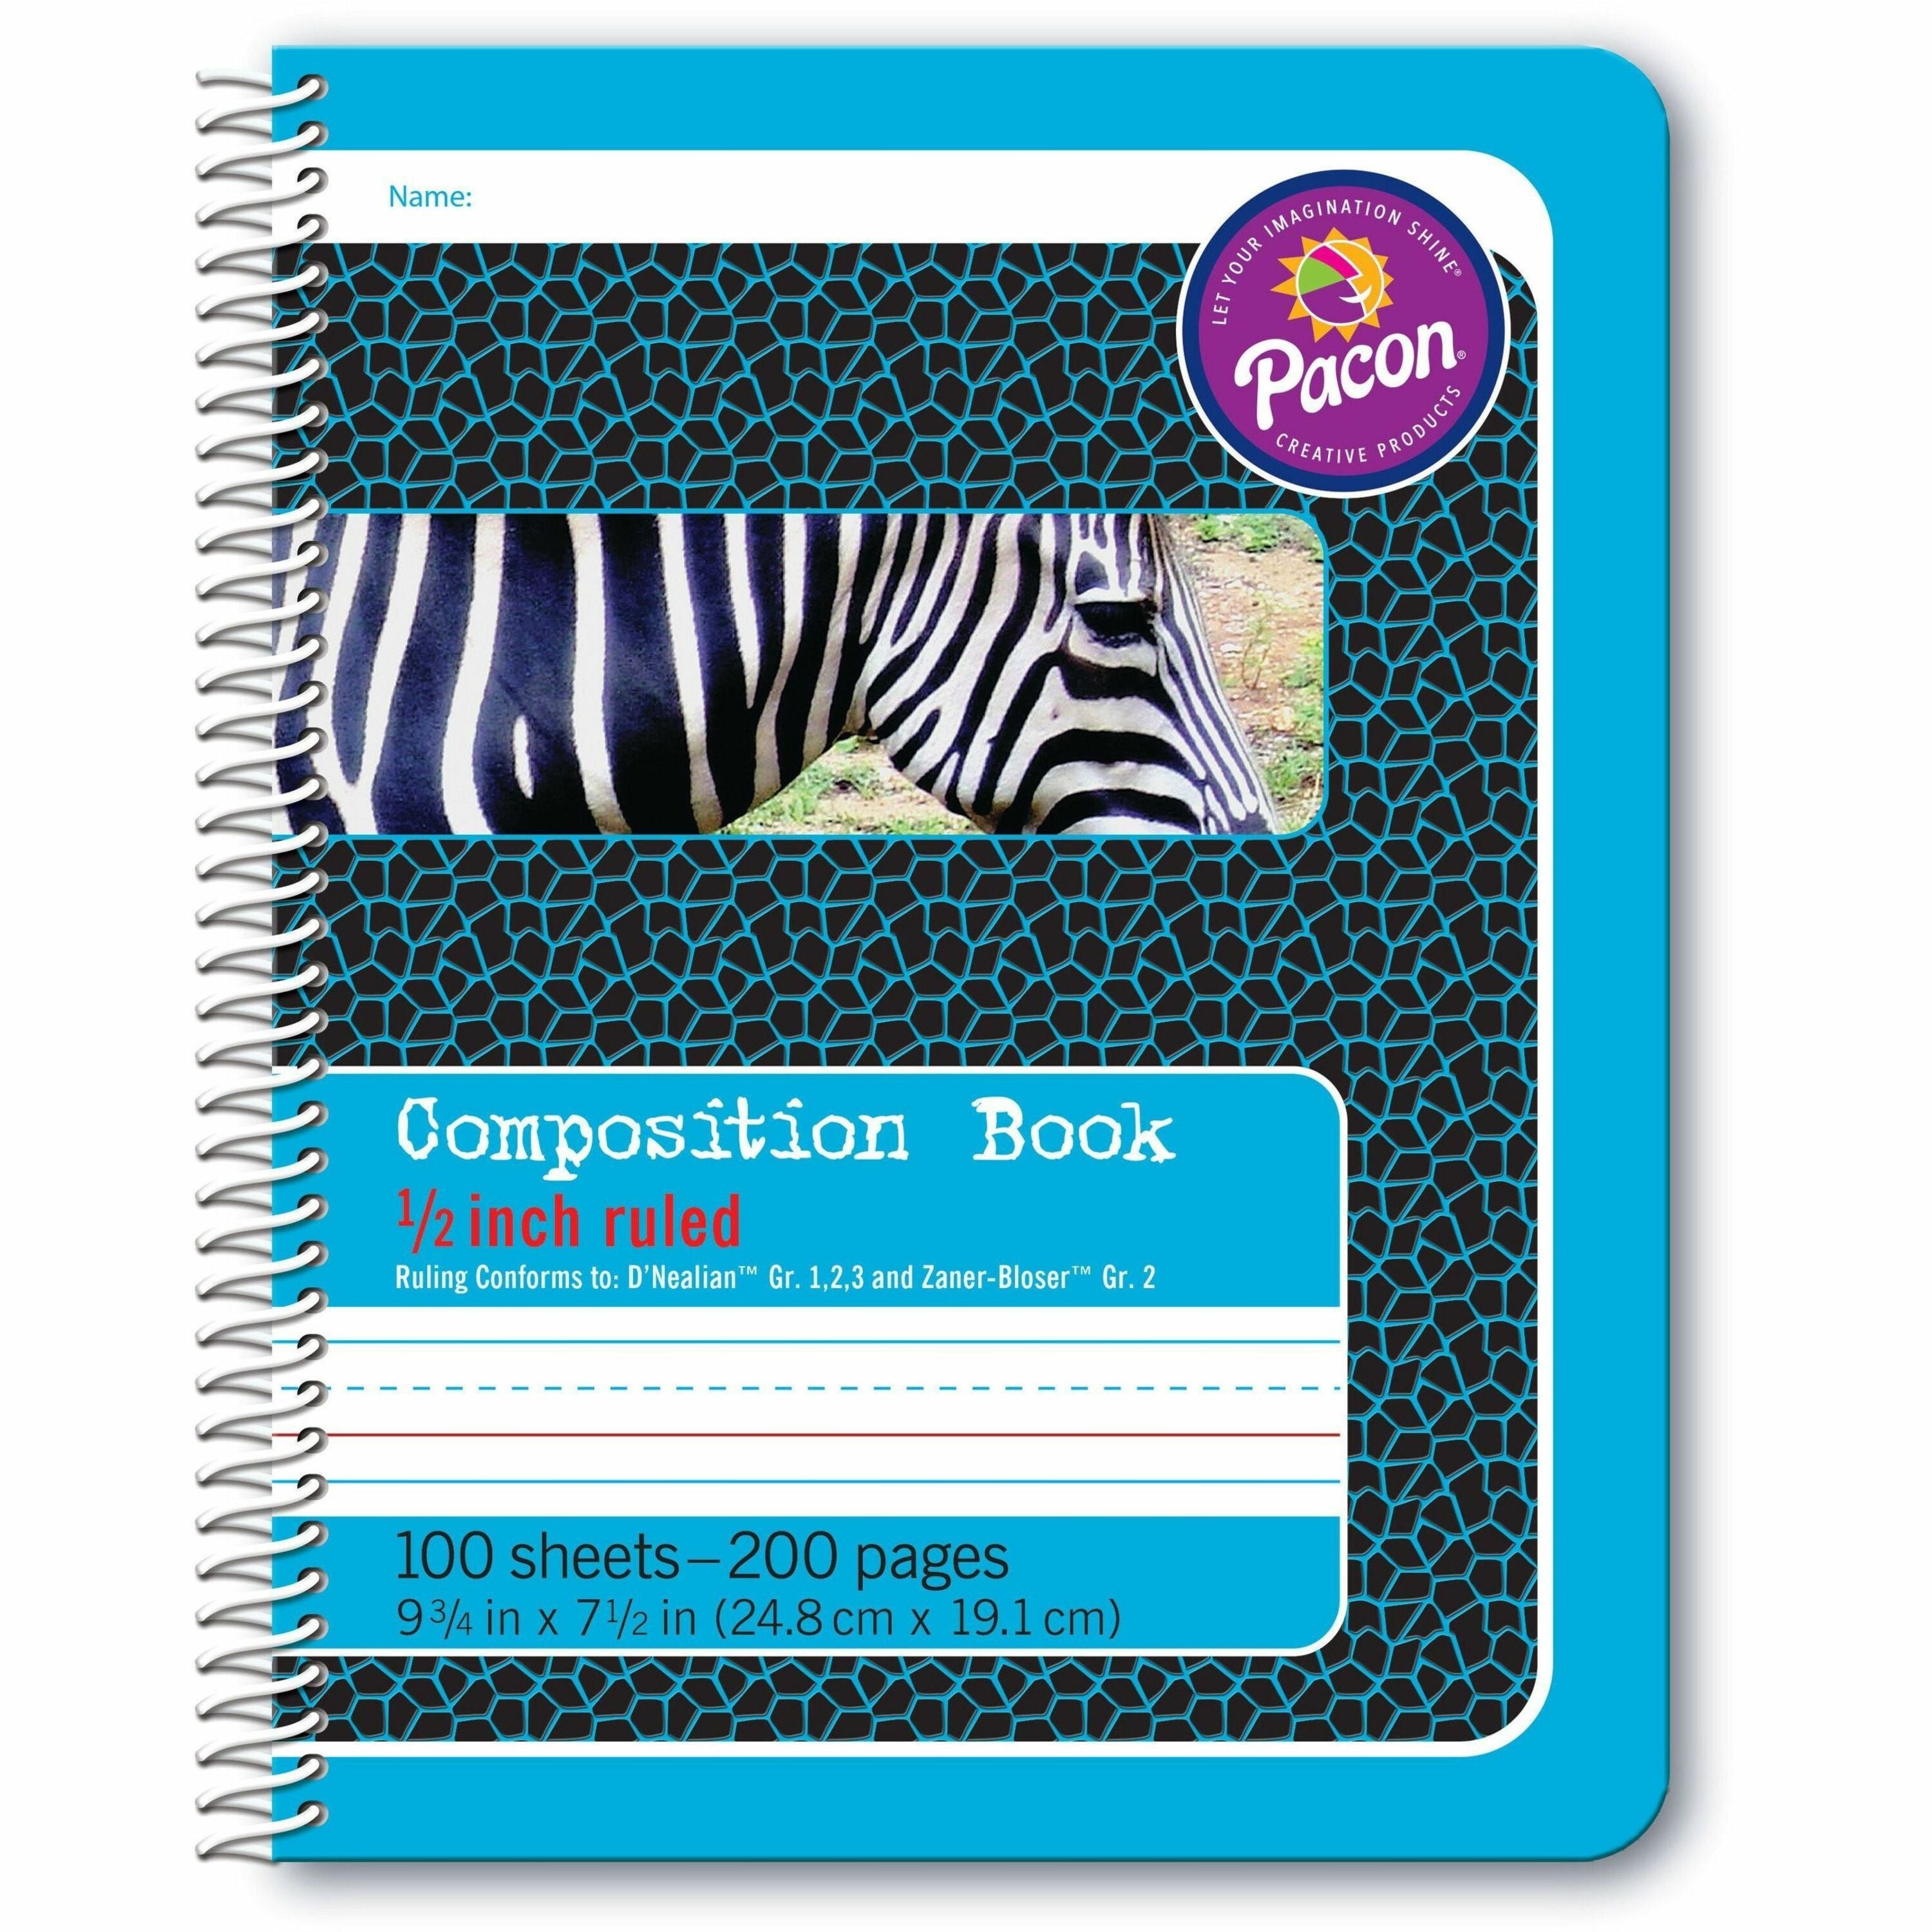 Pacon Composition Book - 100 Sheets - 200 Pages - Spiral Bound - Short Way Ruled - 0.50" Ruled - 7 1/2" x 9 3/4" - Blue Cover - 1 Each - 